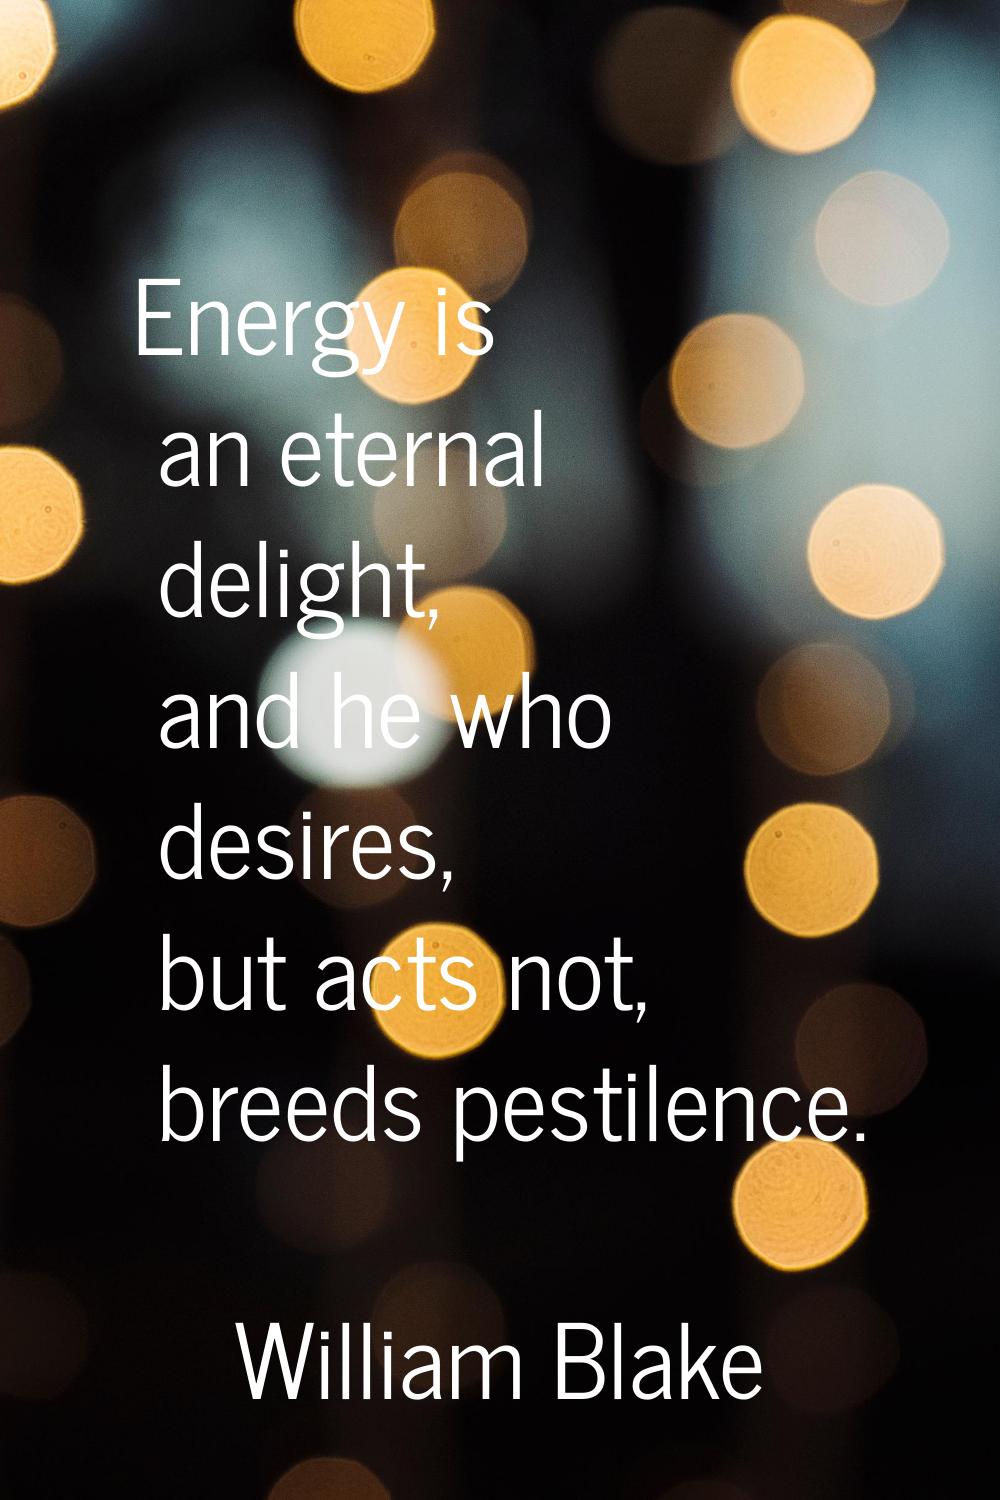 Energy is an eternal delight, and he who desires, but acts not, breeds pestilence.